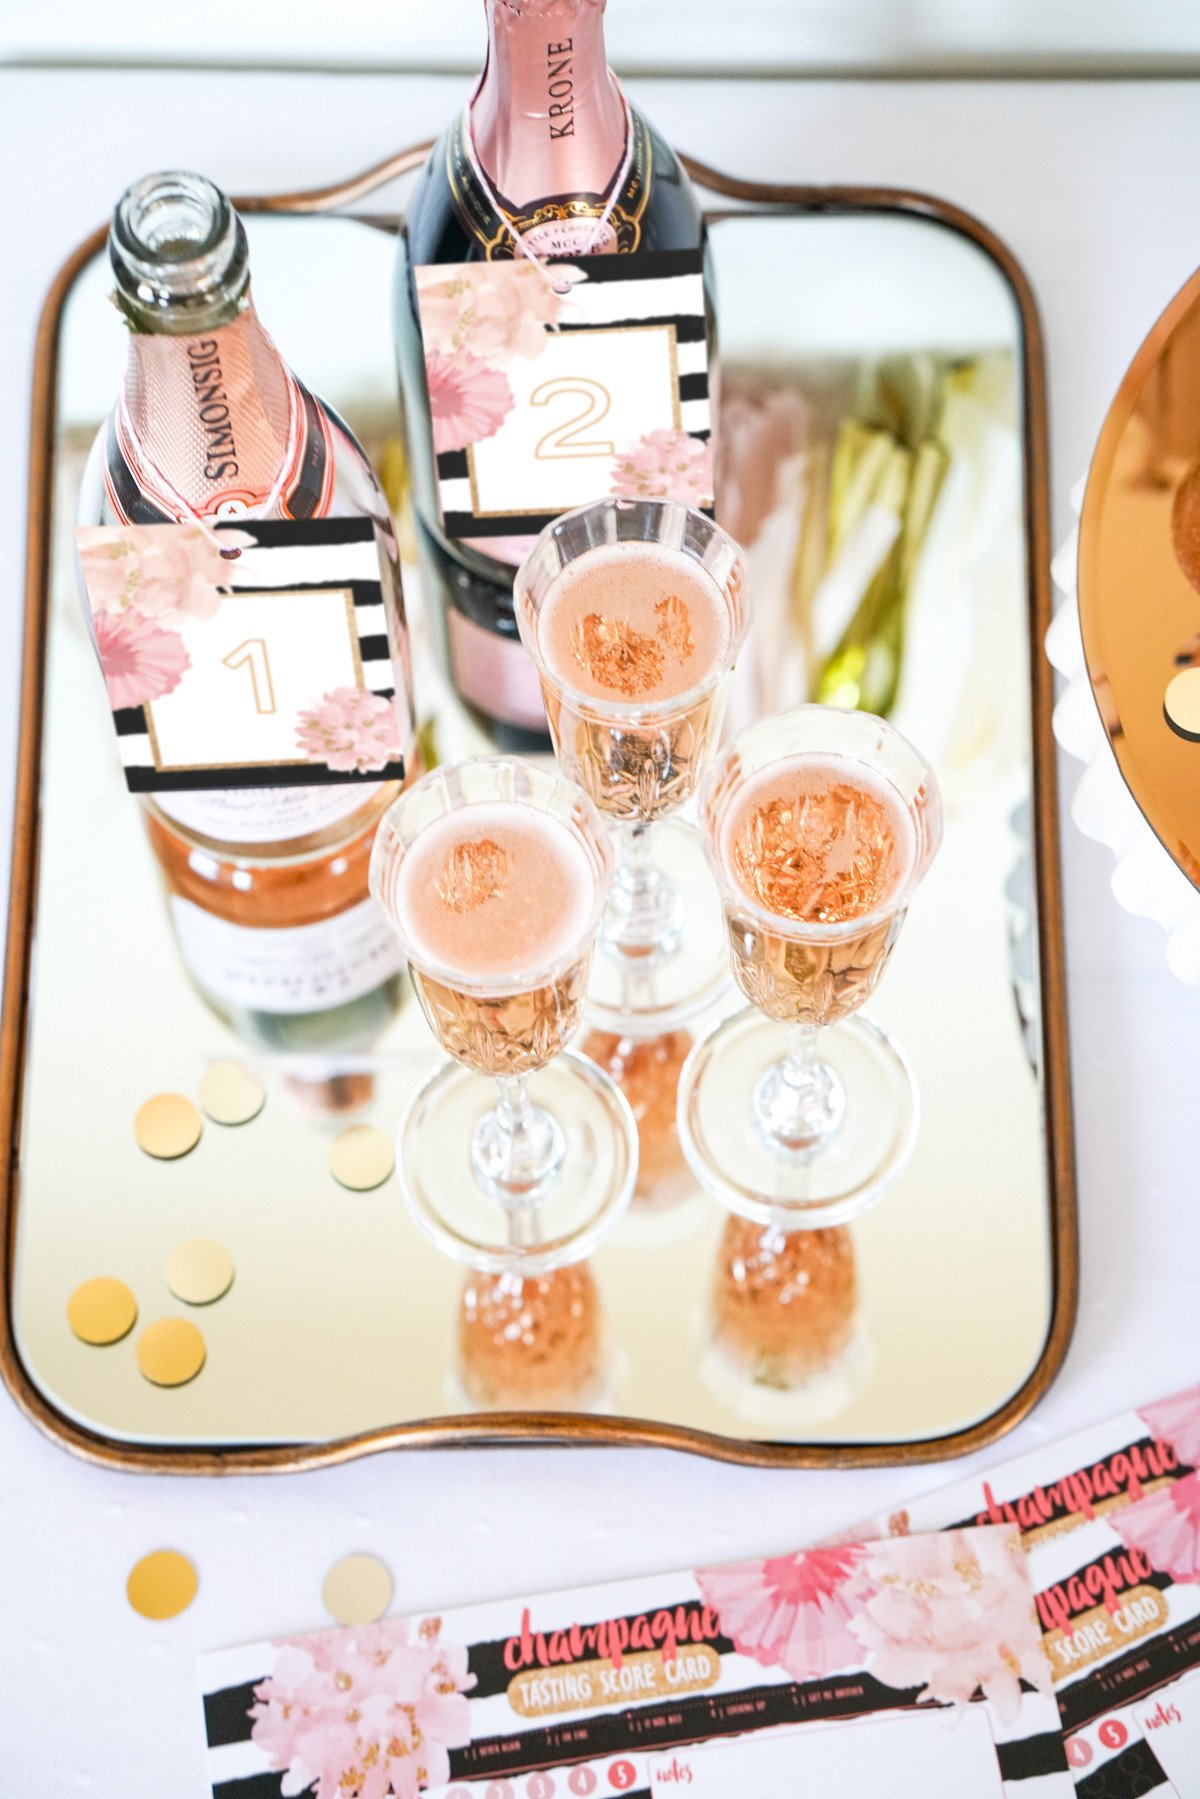 Champagne Tasting Party Pop Fizz Clink invites, score cards and botttle labels